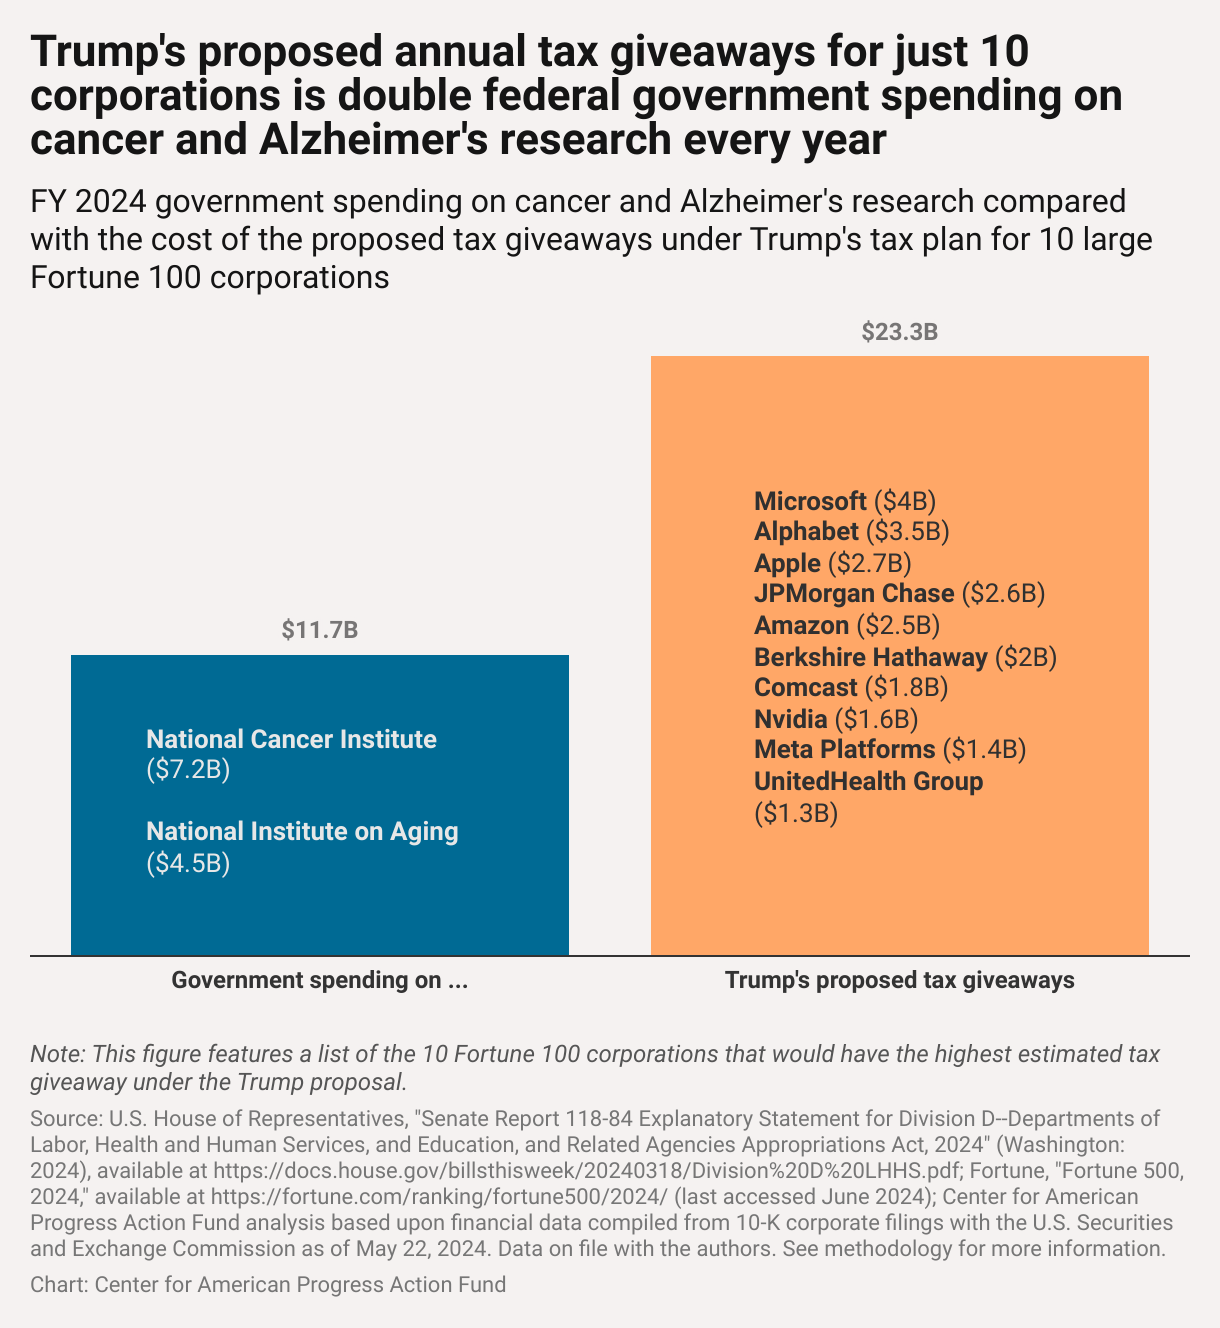 Bar chart comparing the total proposed Trump tax annual giveaways for the 10 Fortune 500 companies that would receive the largest tax cuts from the plan and the annual federal investment in cancer and Alzheimer's research, finding that the tax cuts would cost roughtly $10 billion more than the annual federal investments to combat some of the nation's most concerning diseases. 